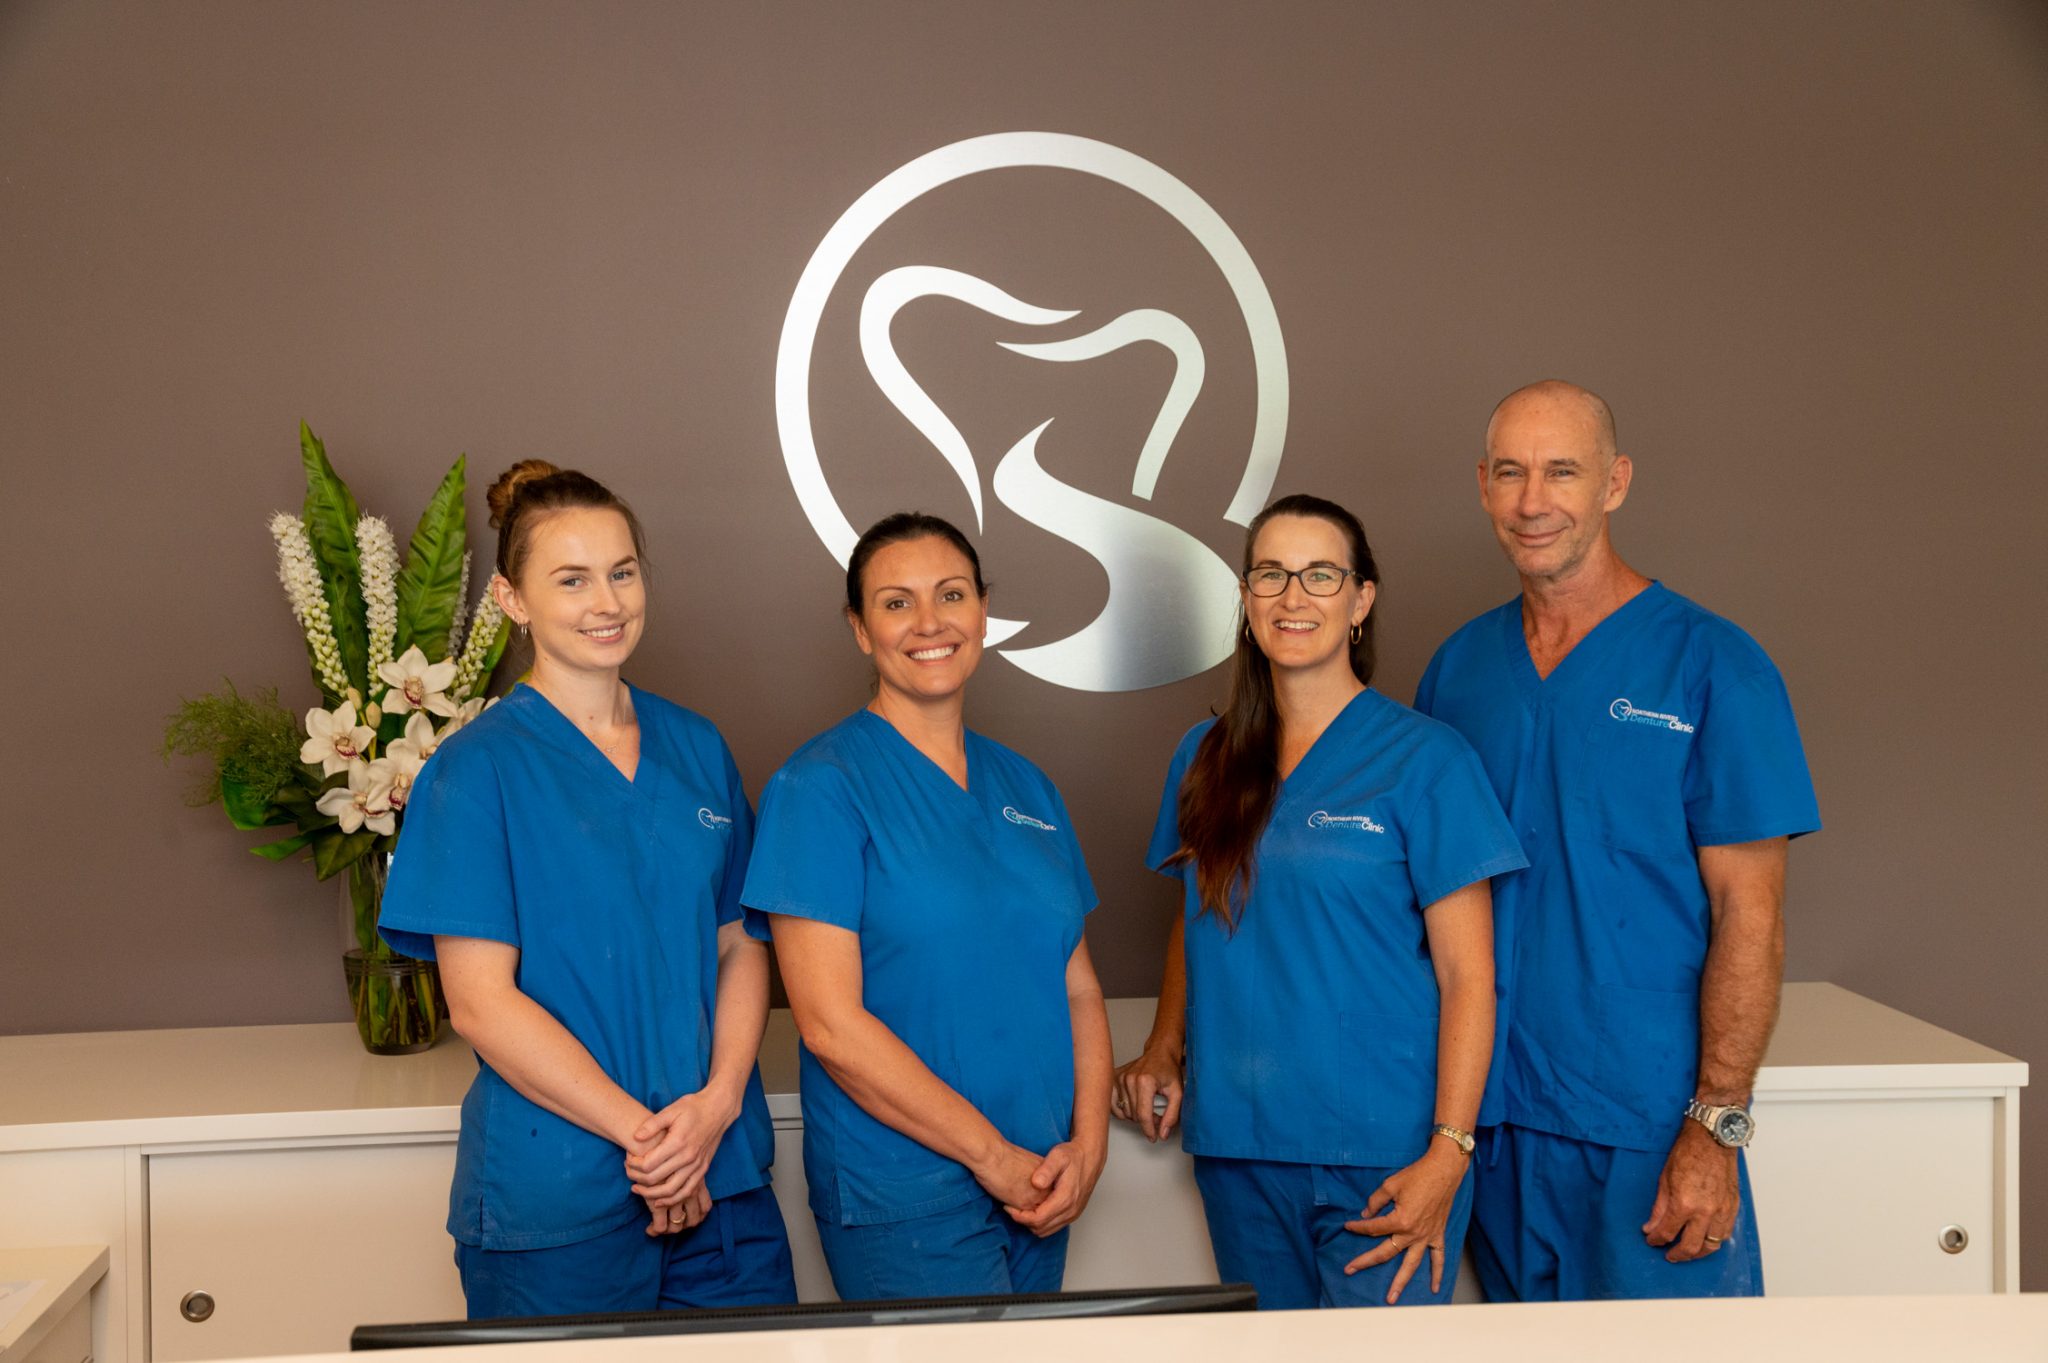 Northern Rivers Denture Clinic